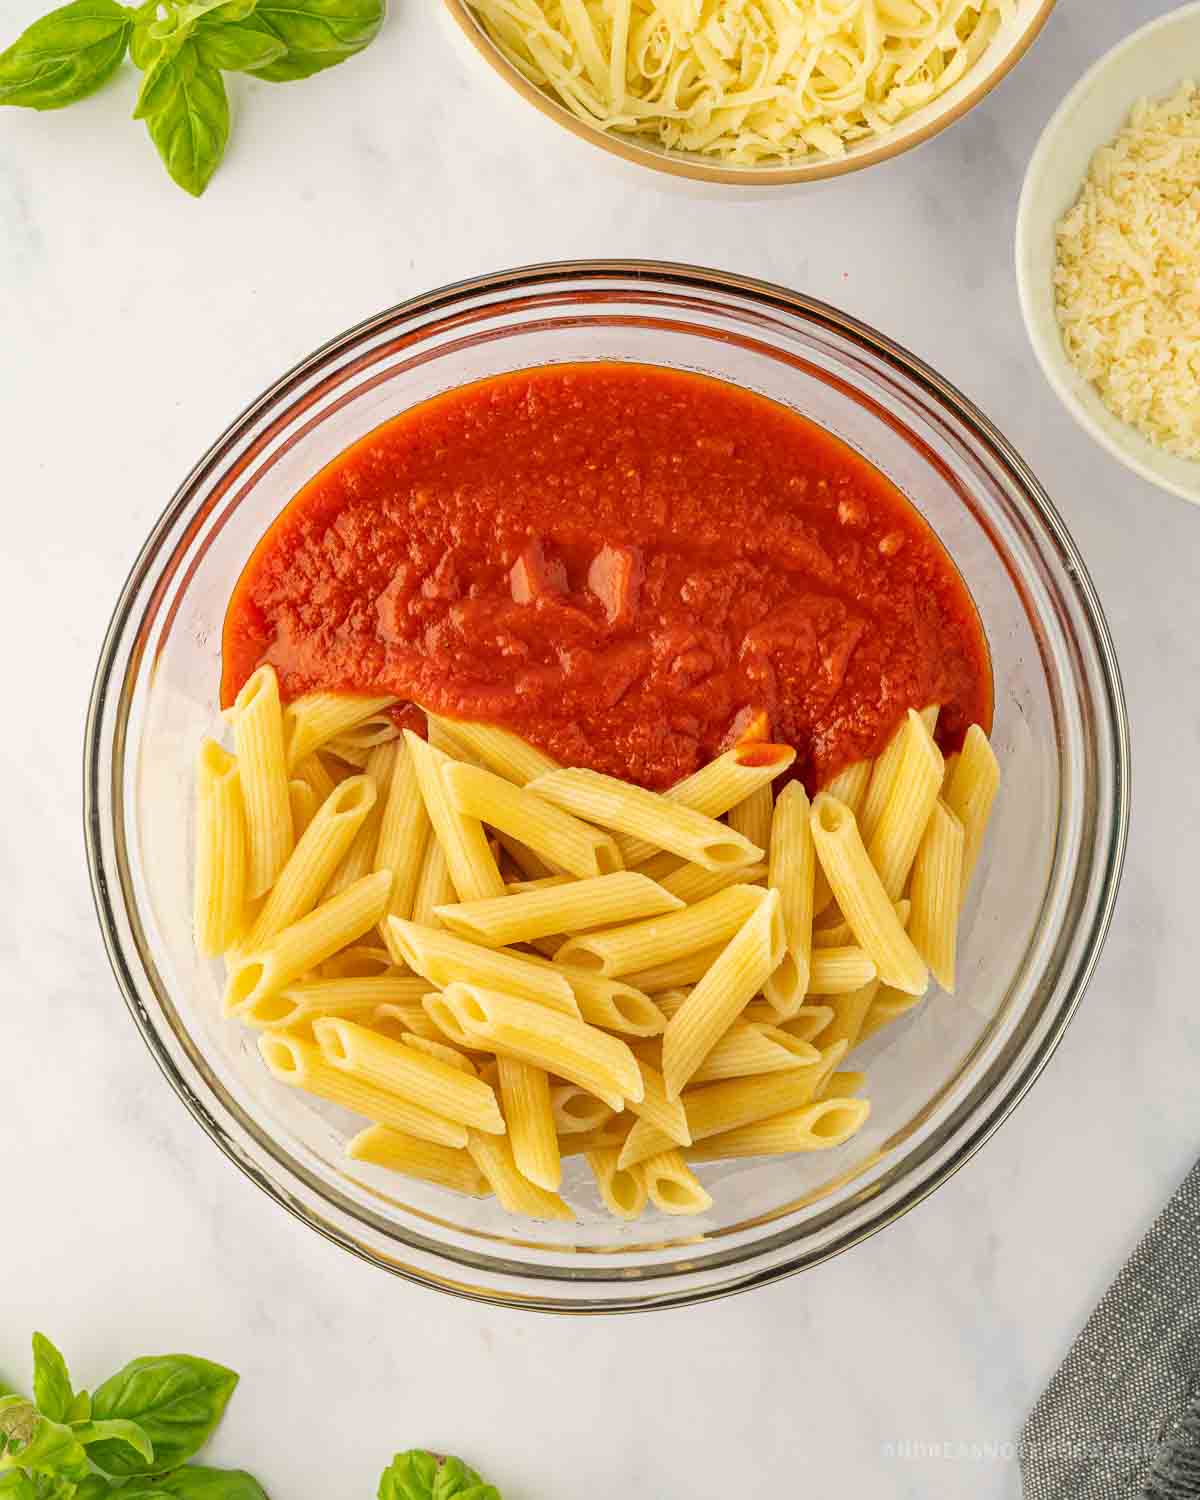 Marinara sauce mixed with penne pasta in a bowl.